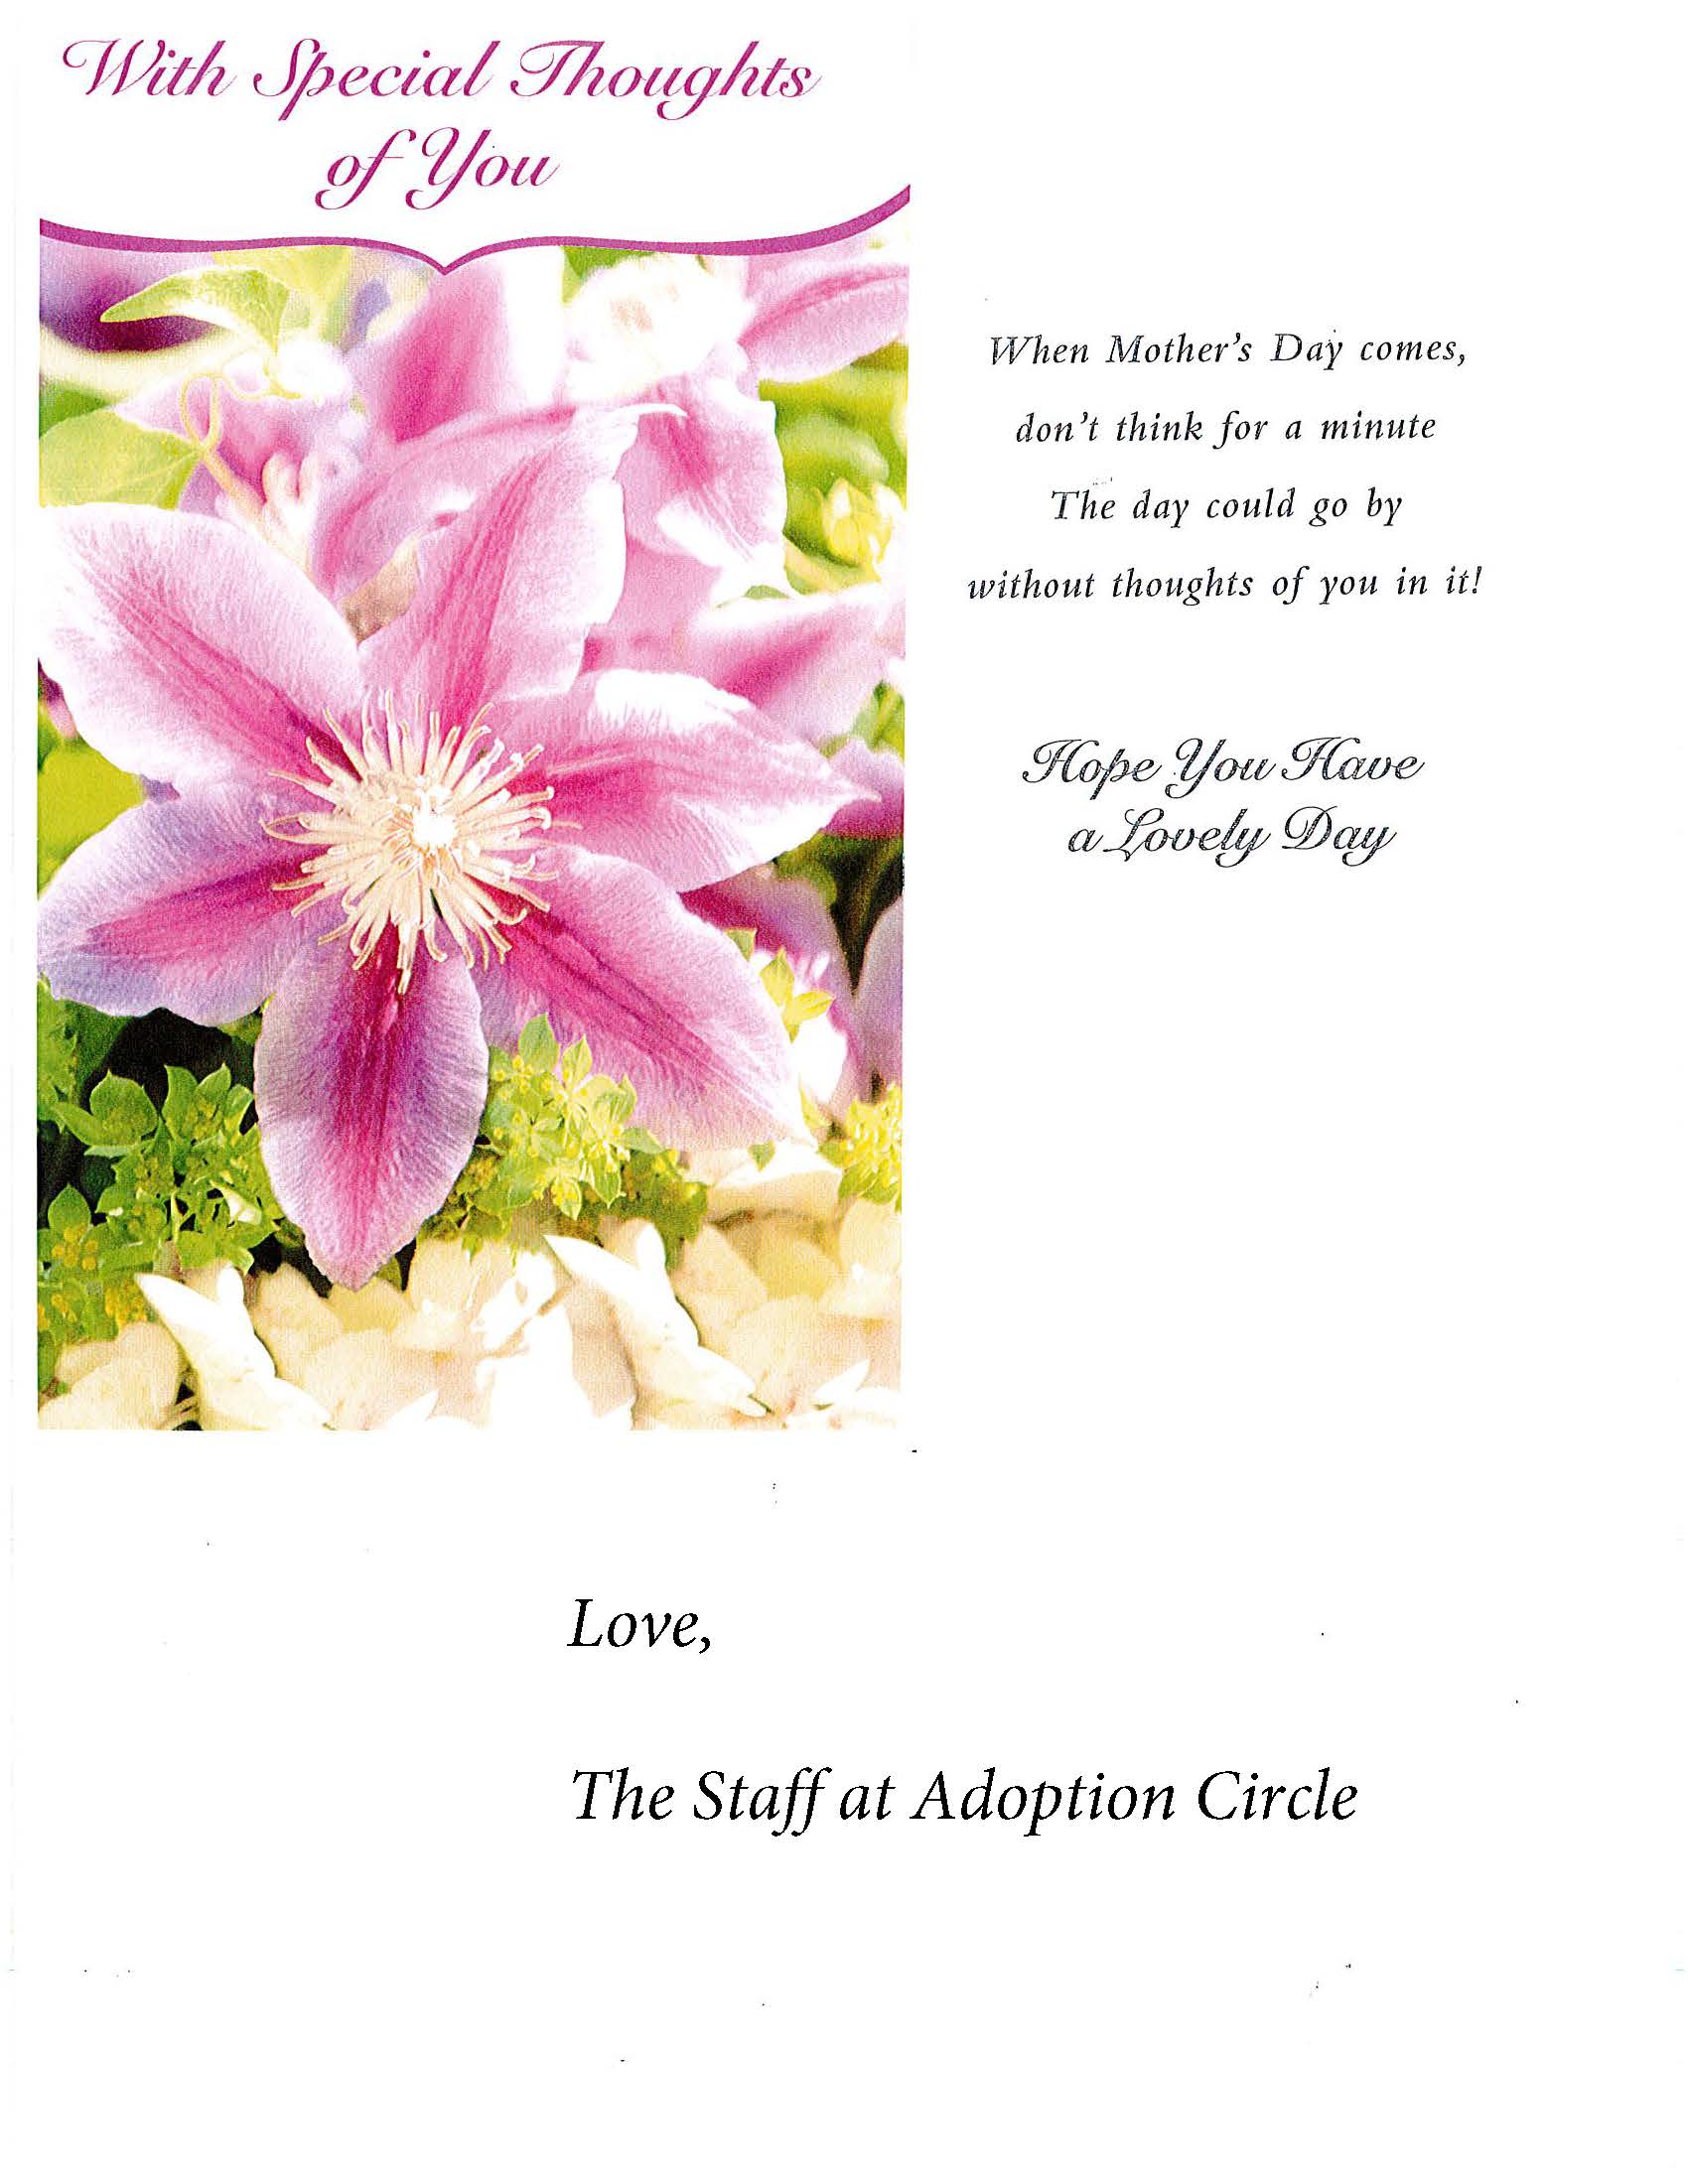 Happy Mother's Day from your friends at Adoption Circle